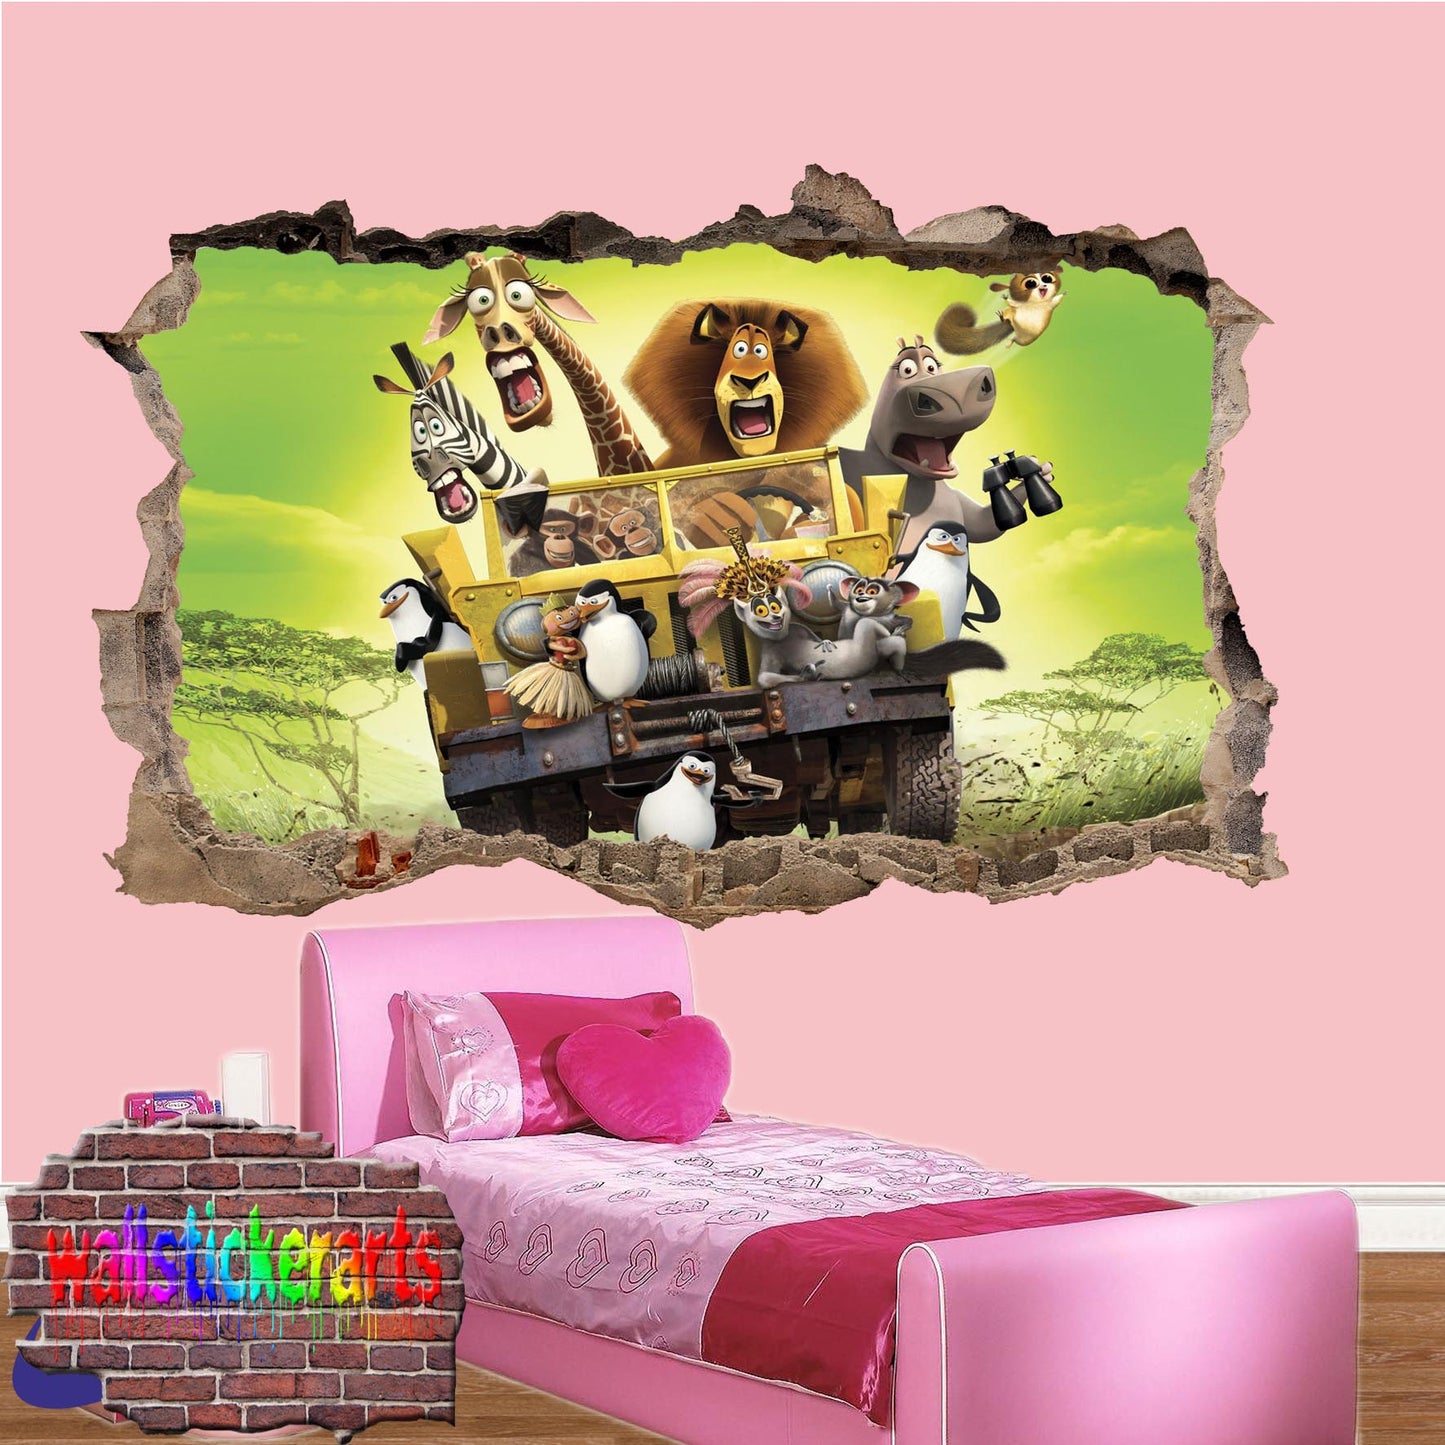 Madagascar Cartoon Characters 3d Art Smashed Effect Wall Sticker Room Office Nursery Shop Decoration Decal Mural YL8